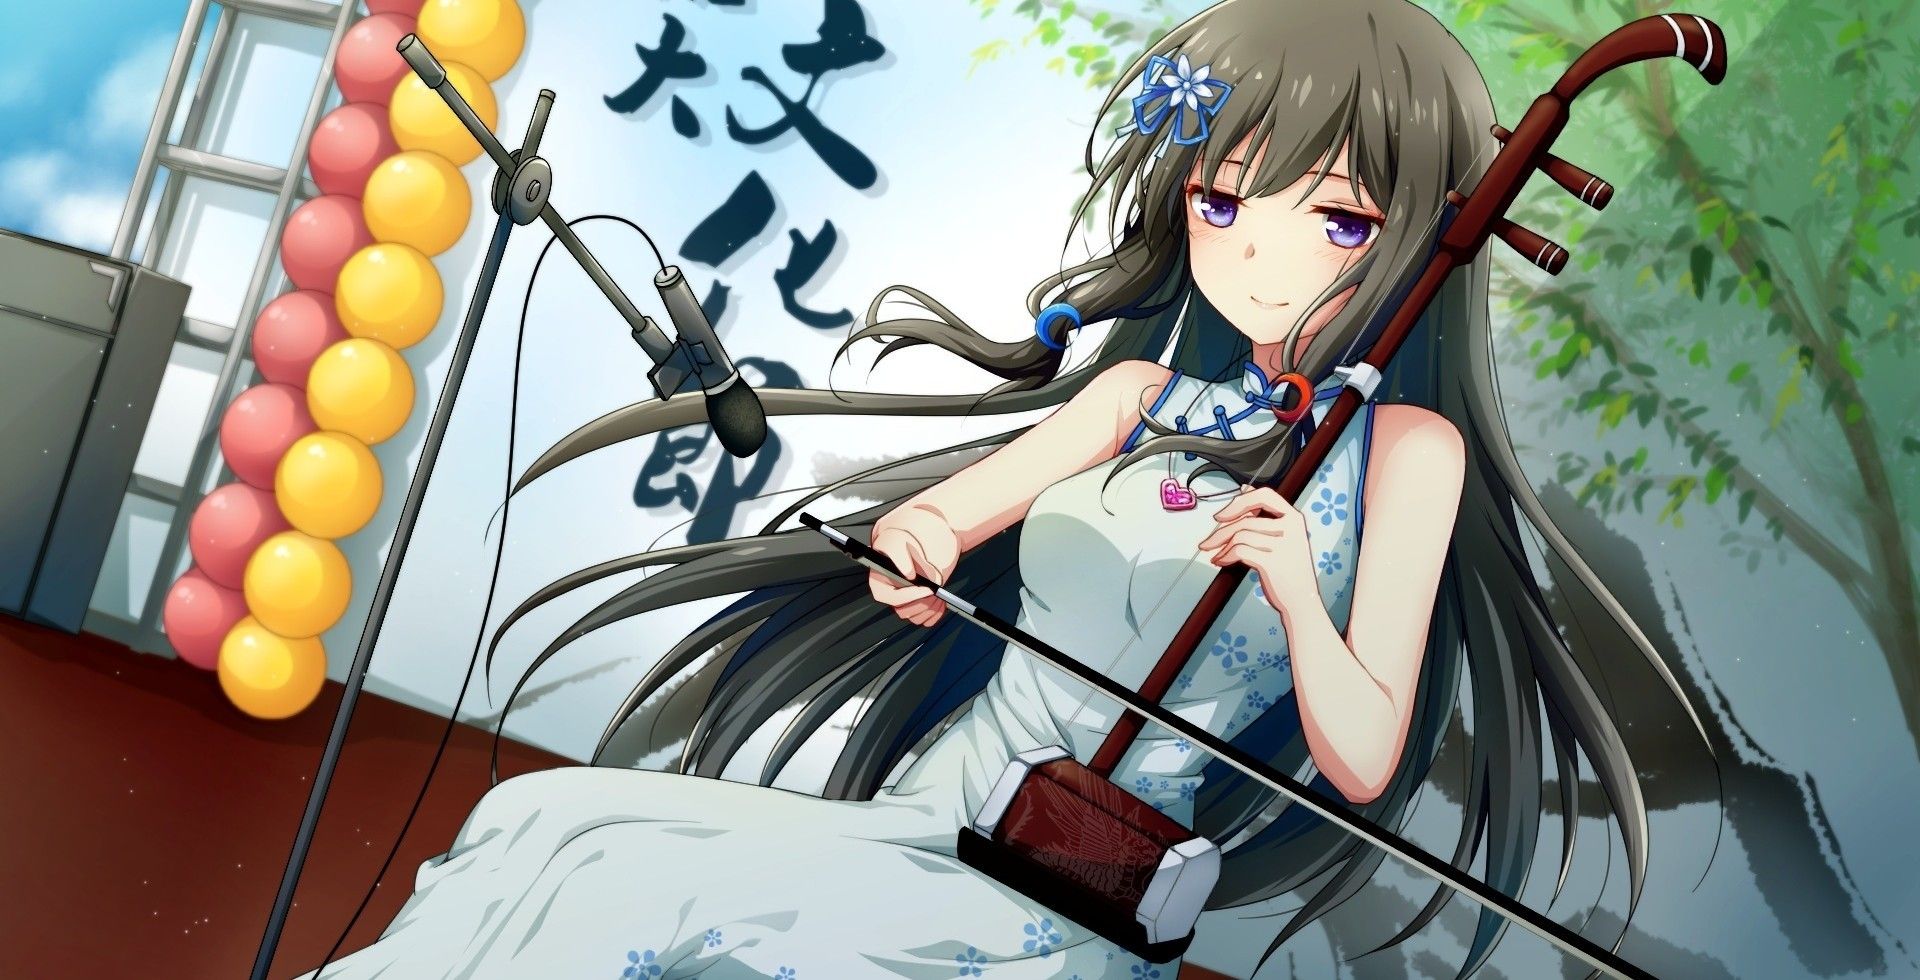 Download 1920x980 Anime Girl, Chinese .wallpapermaiden.com